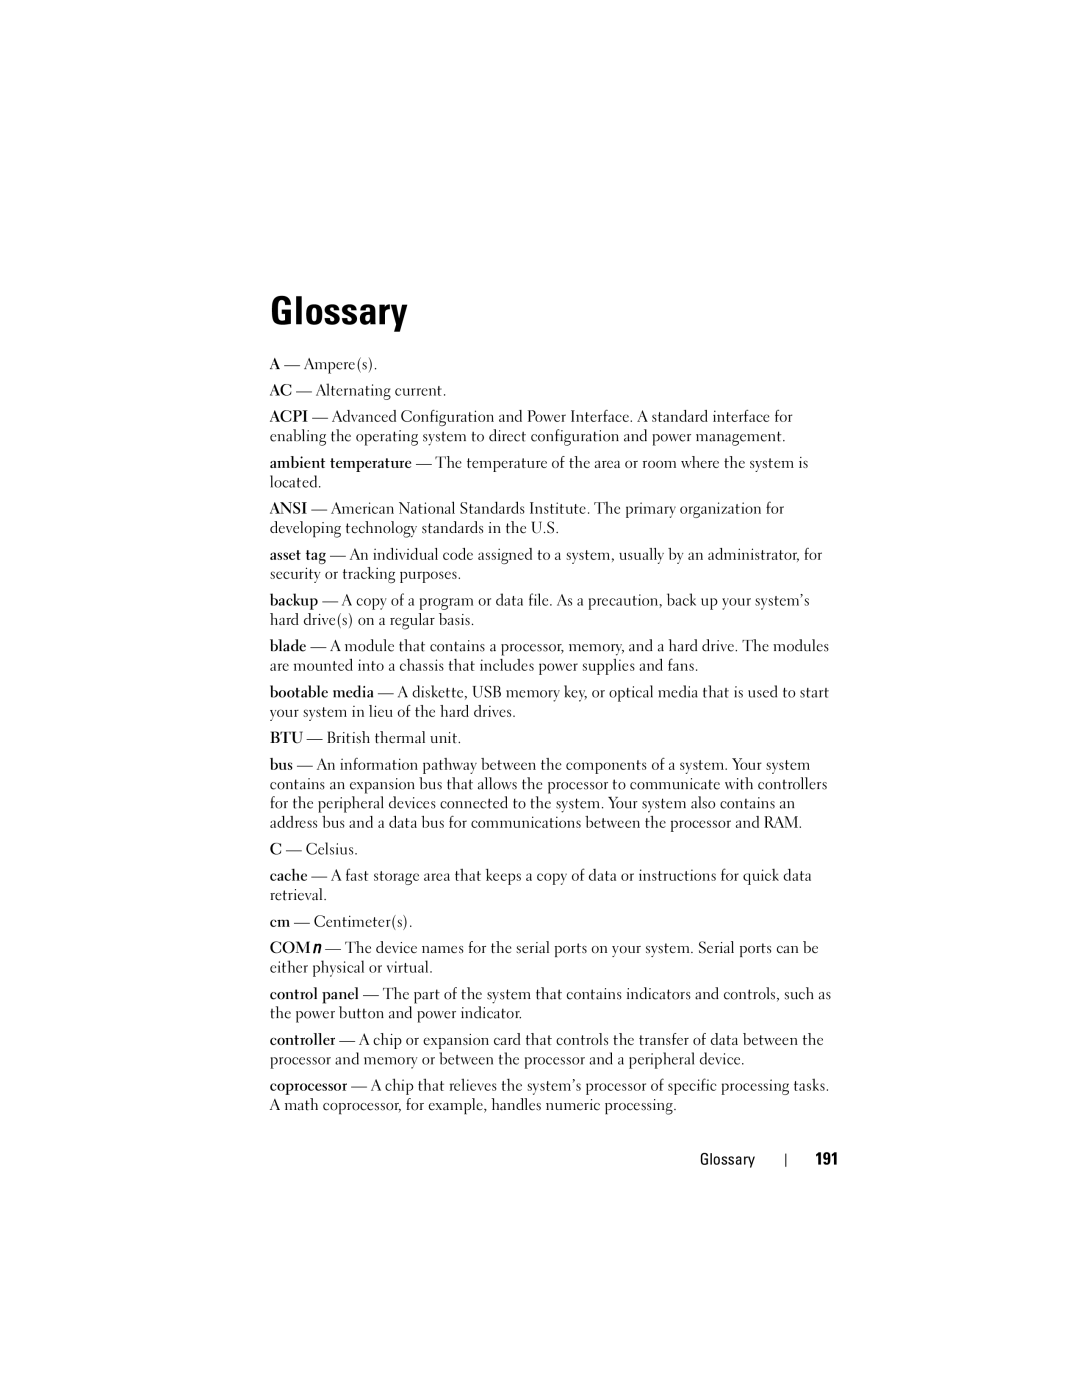 Dell R710 owner manual 191, Amperes AC Alternating current, Glossary 